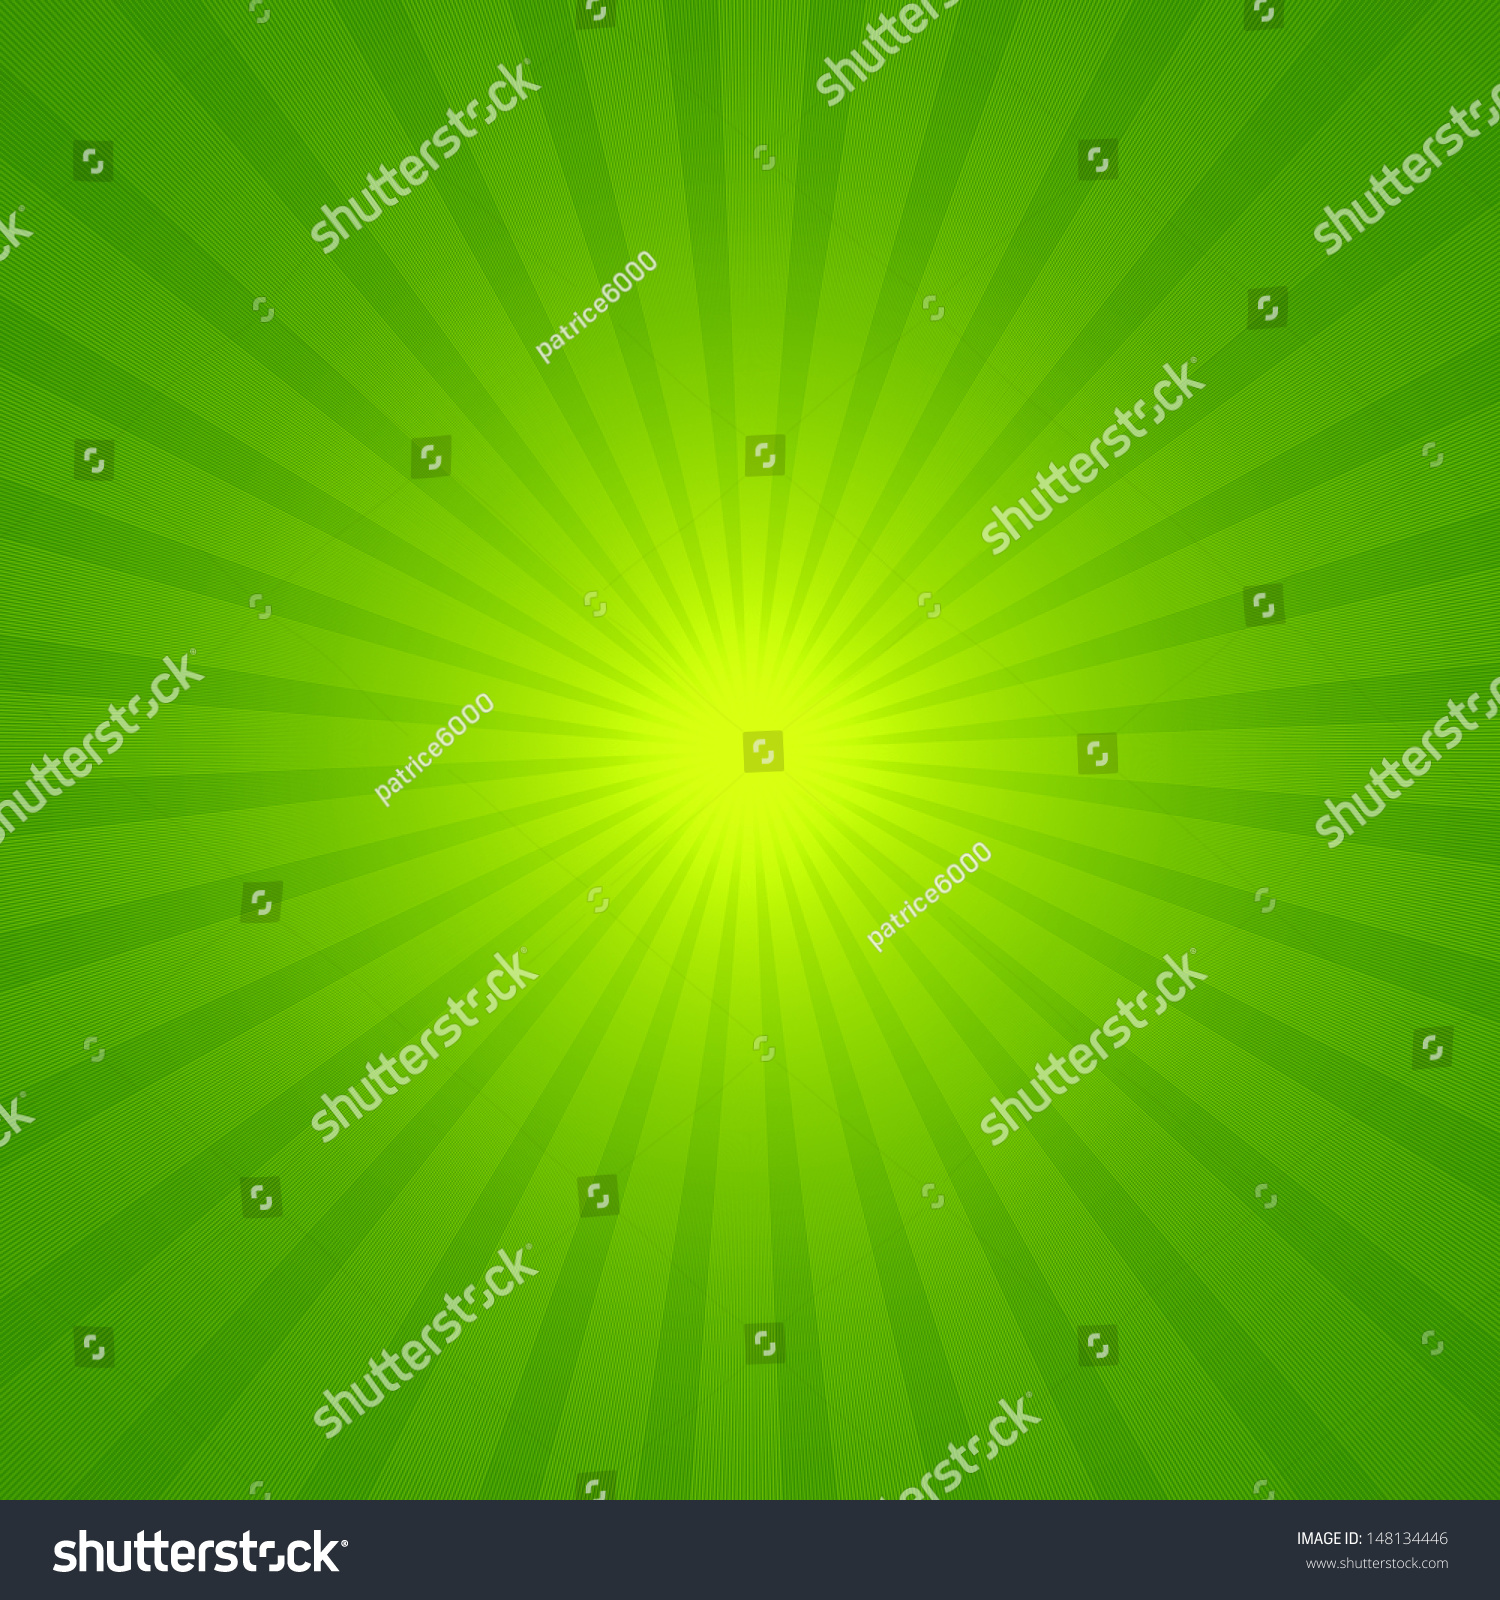 Sun, With Green Yellow Background Stock Photo 148134446 : Shutterstock